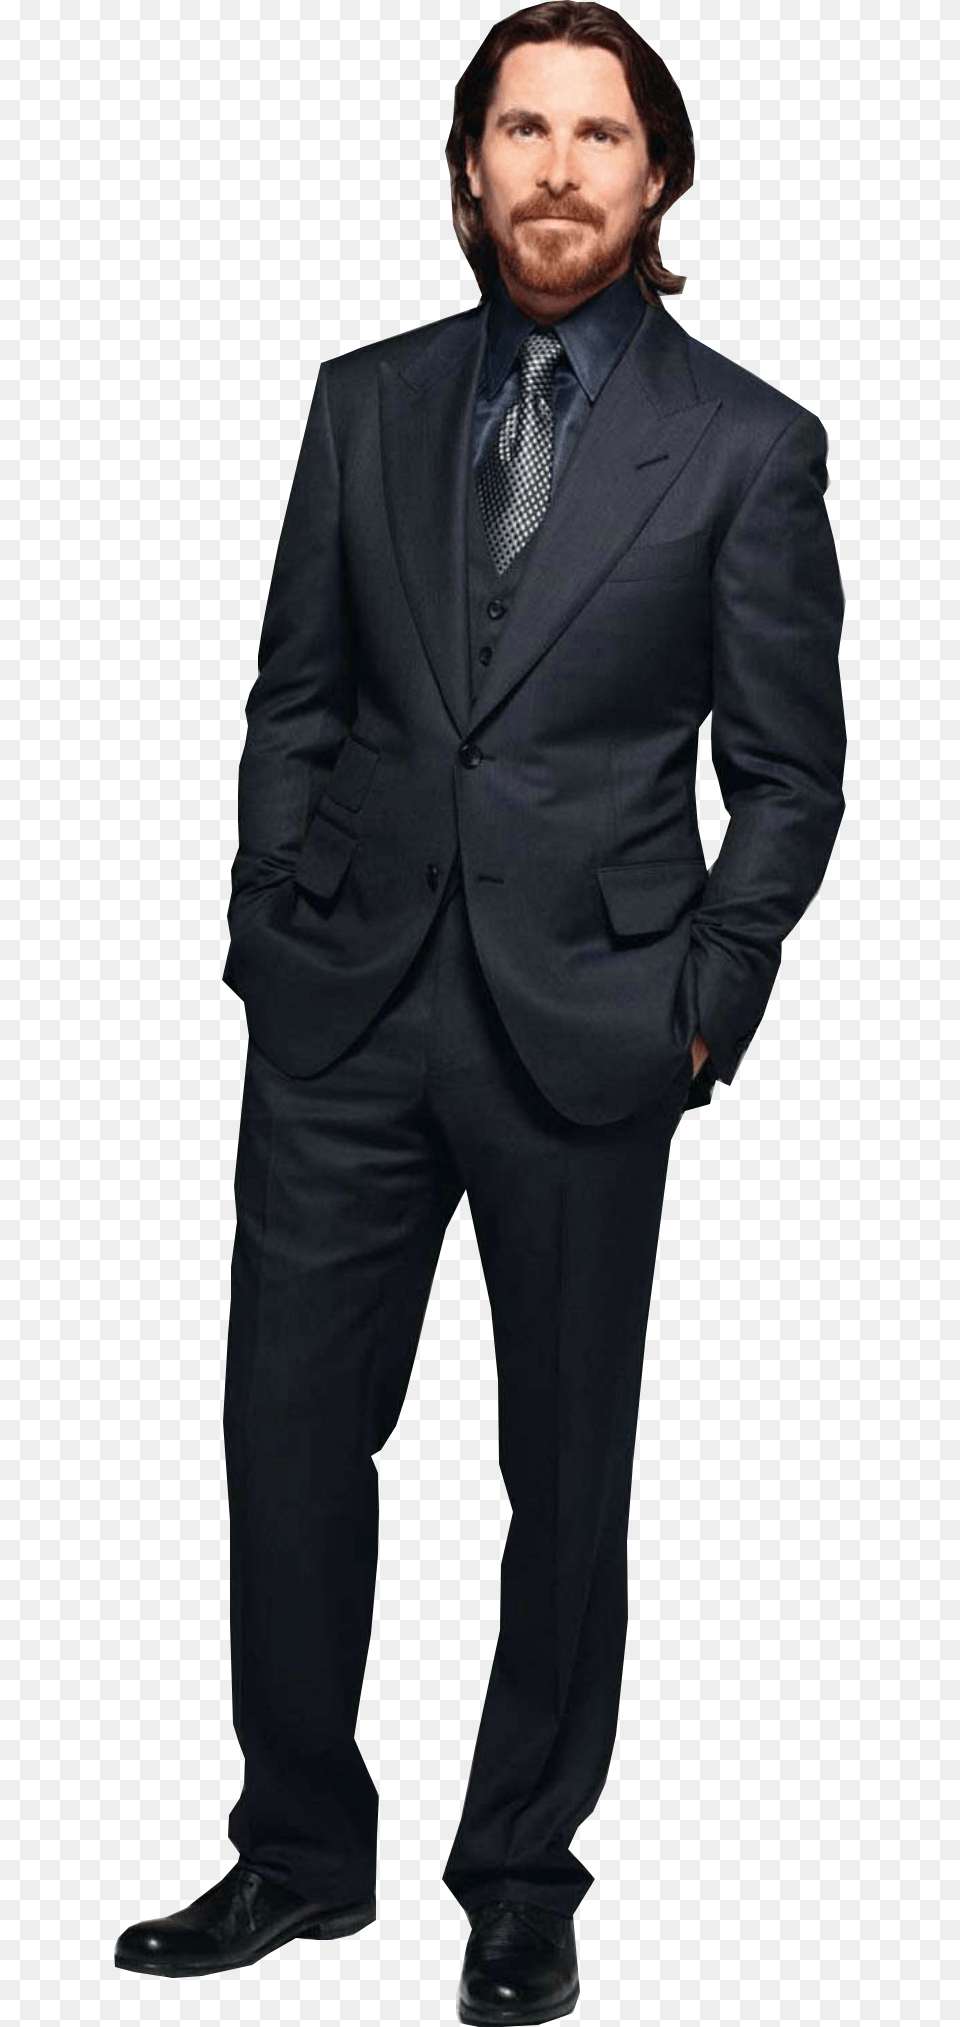 Christianbale Christian Bale Oscars Vice Businessman Full Body, Accessories, Tie, Suit, Tuxedo Free Png Download